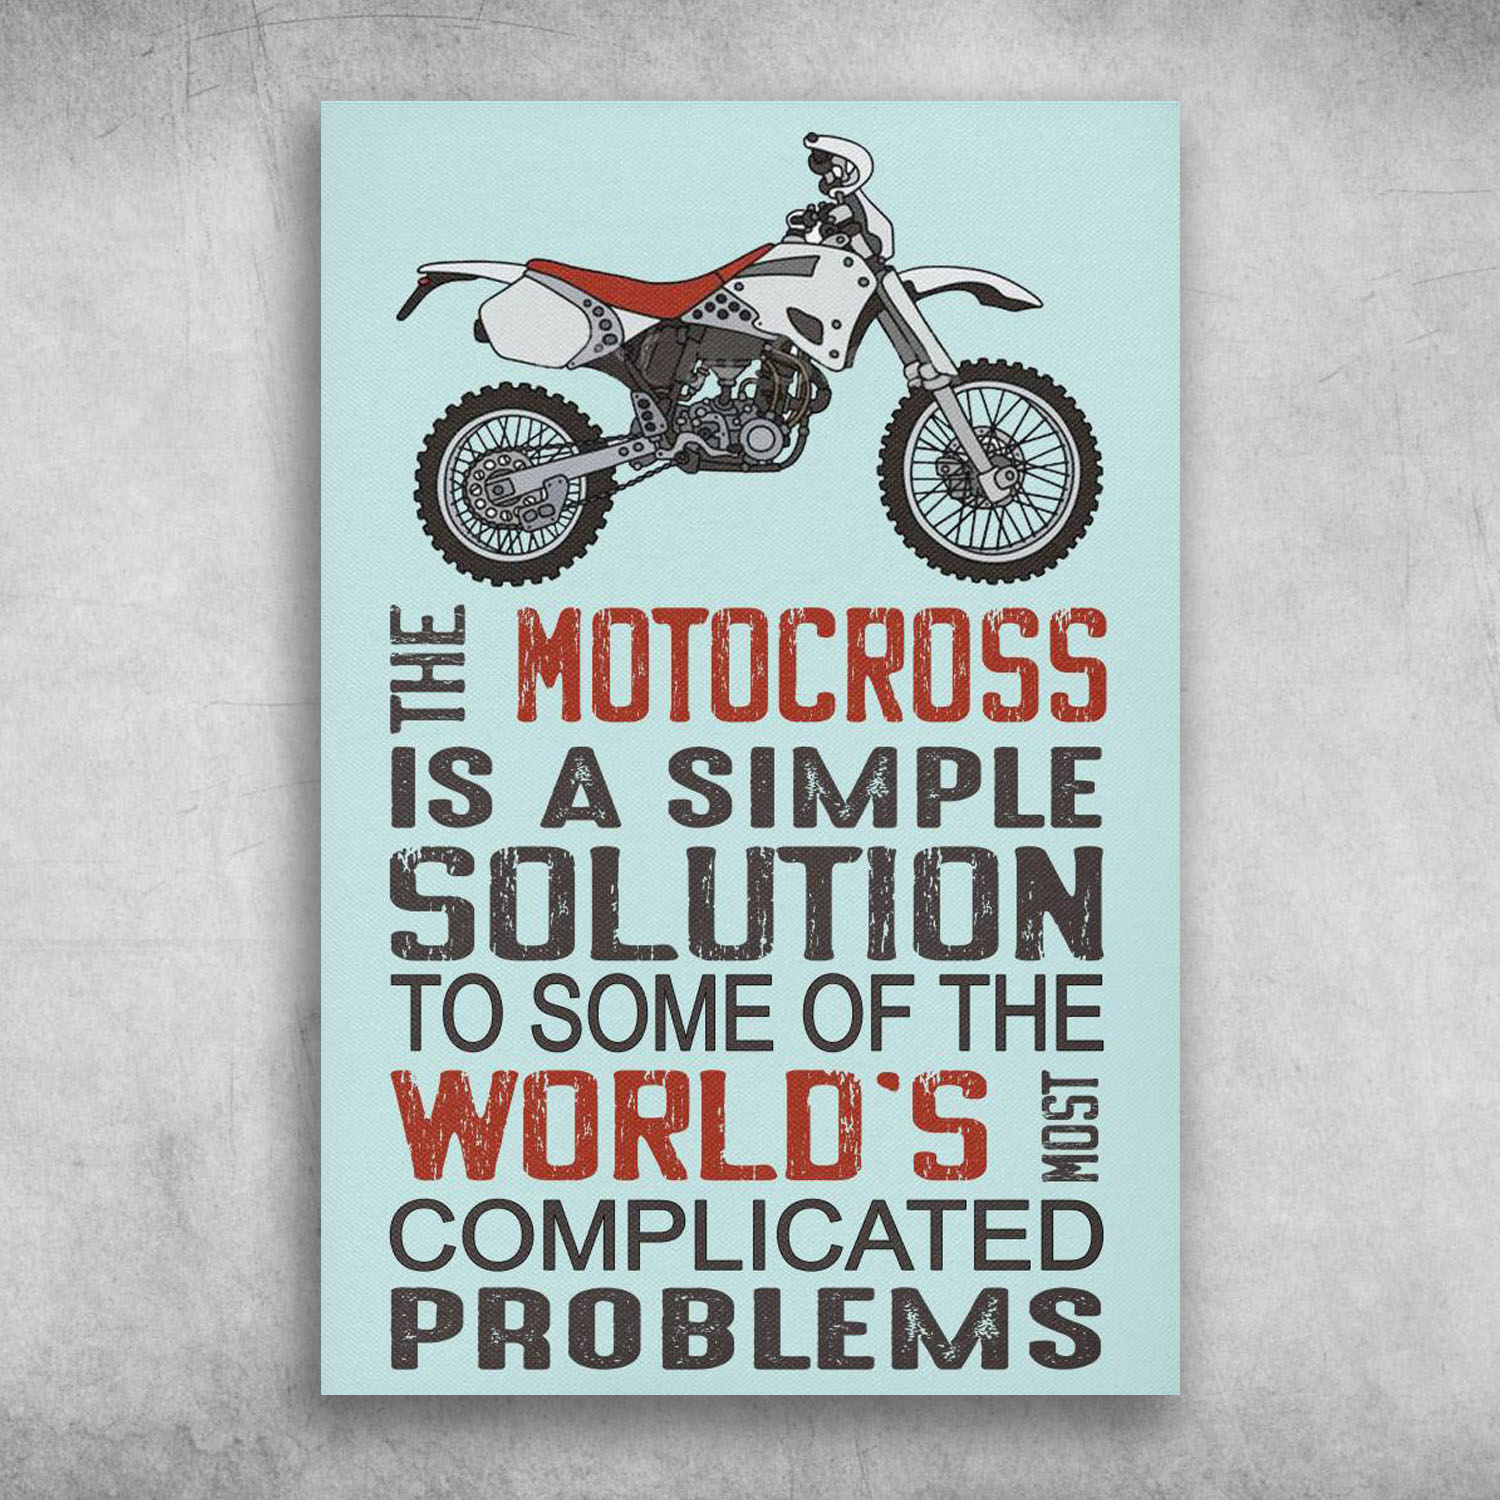 The Motocross Motorbike Is A Simple Solution